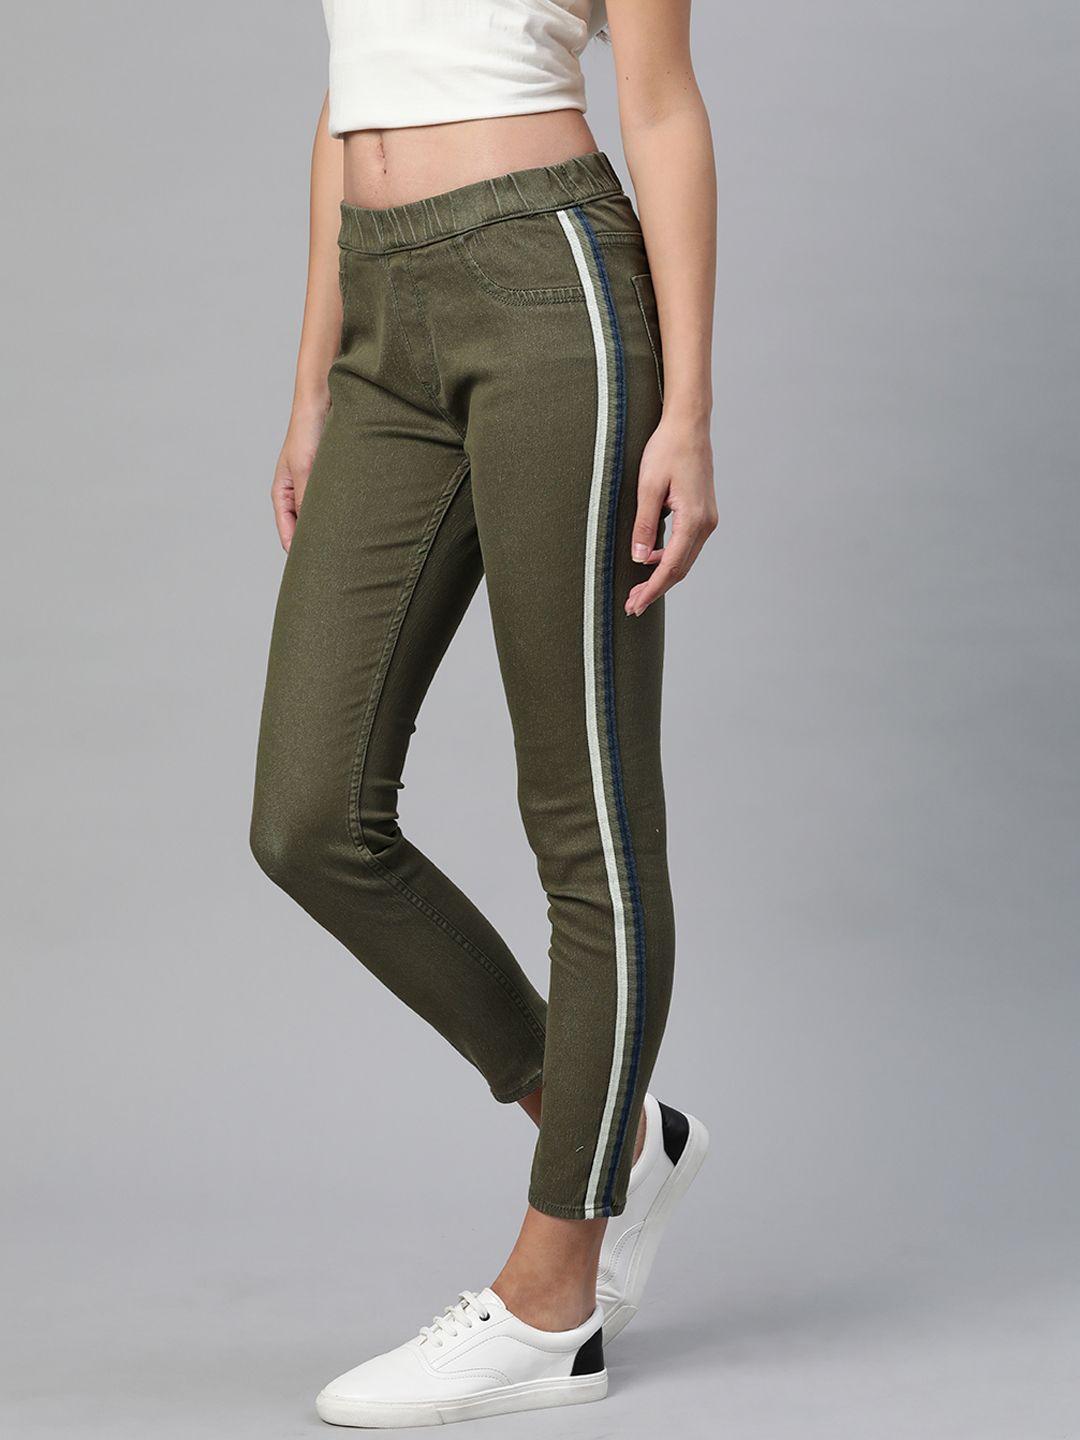 roadster-women-olive-green-solid-cropped-jeggings-with-side-stripes